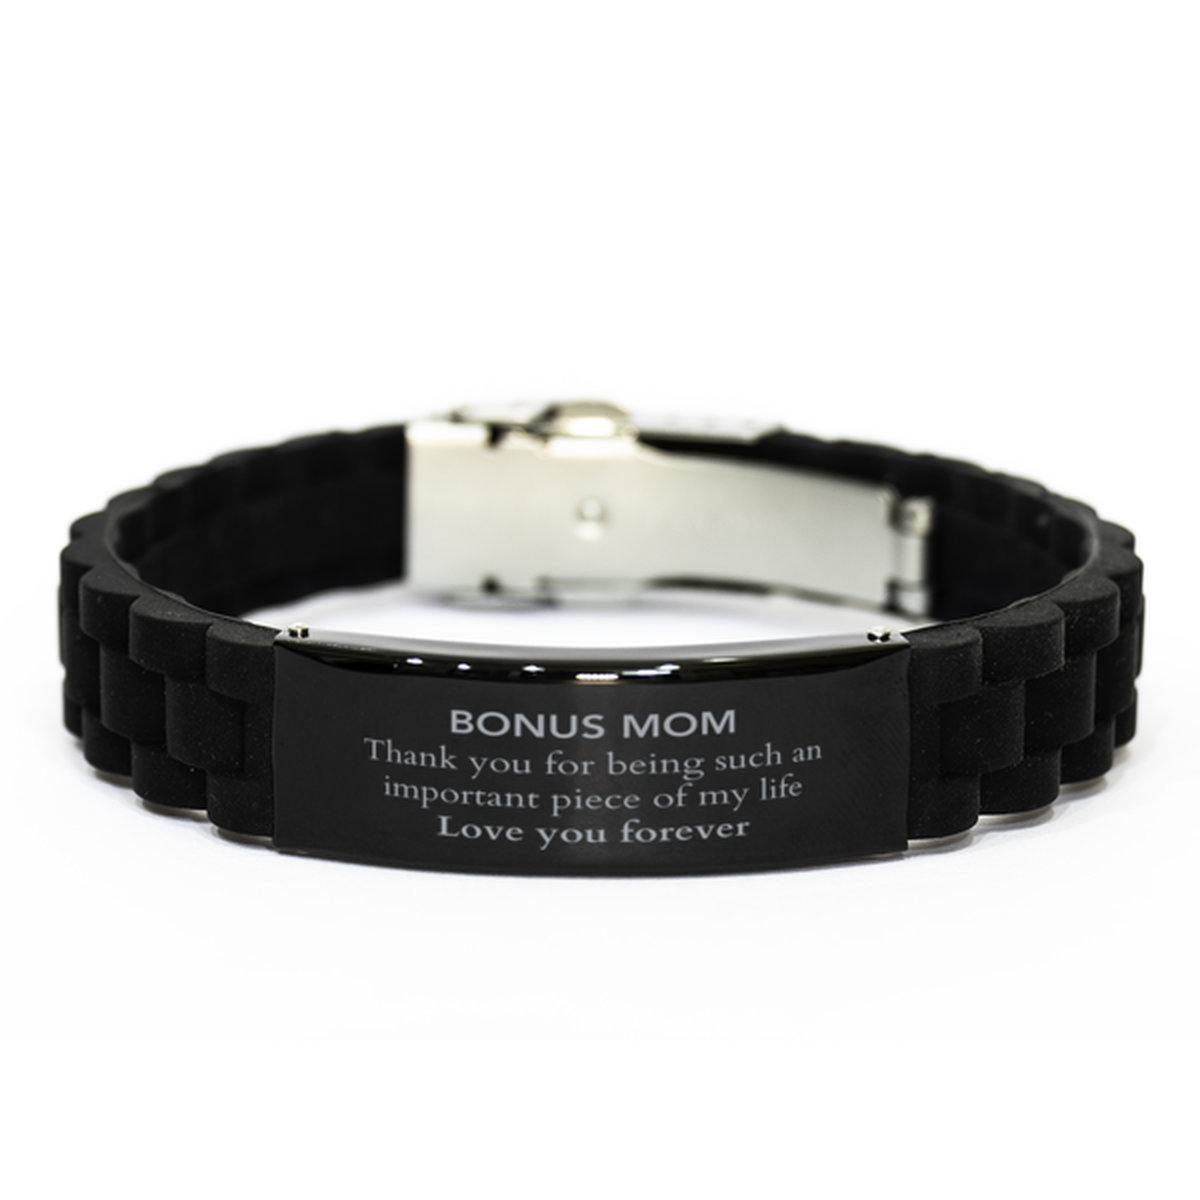 Appropriate Bonus Mom Black Glidelock Clasp Bracelet Epic Birthday Gifts for Bonus Mom Thank you for being such an important piece of my life Bonus Mom Christmas Mothers Fathers Day